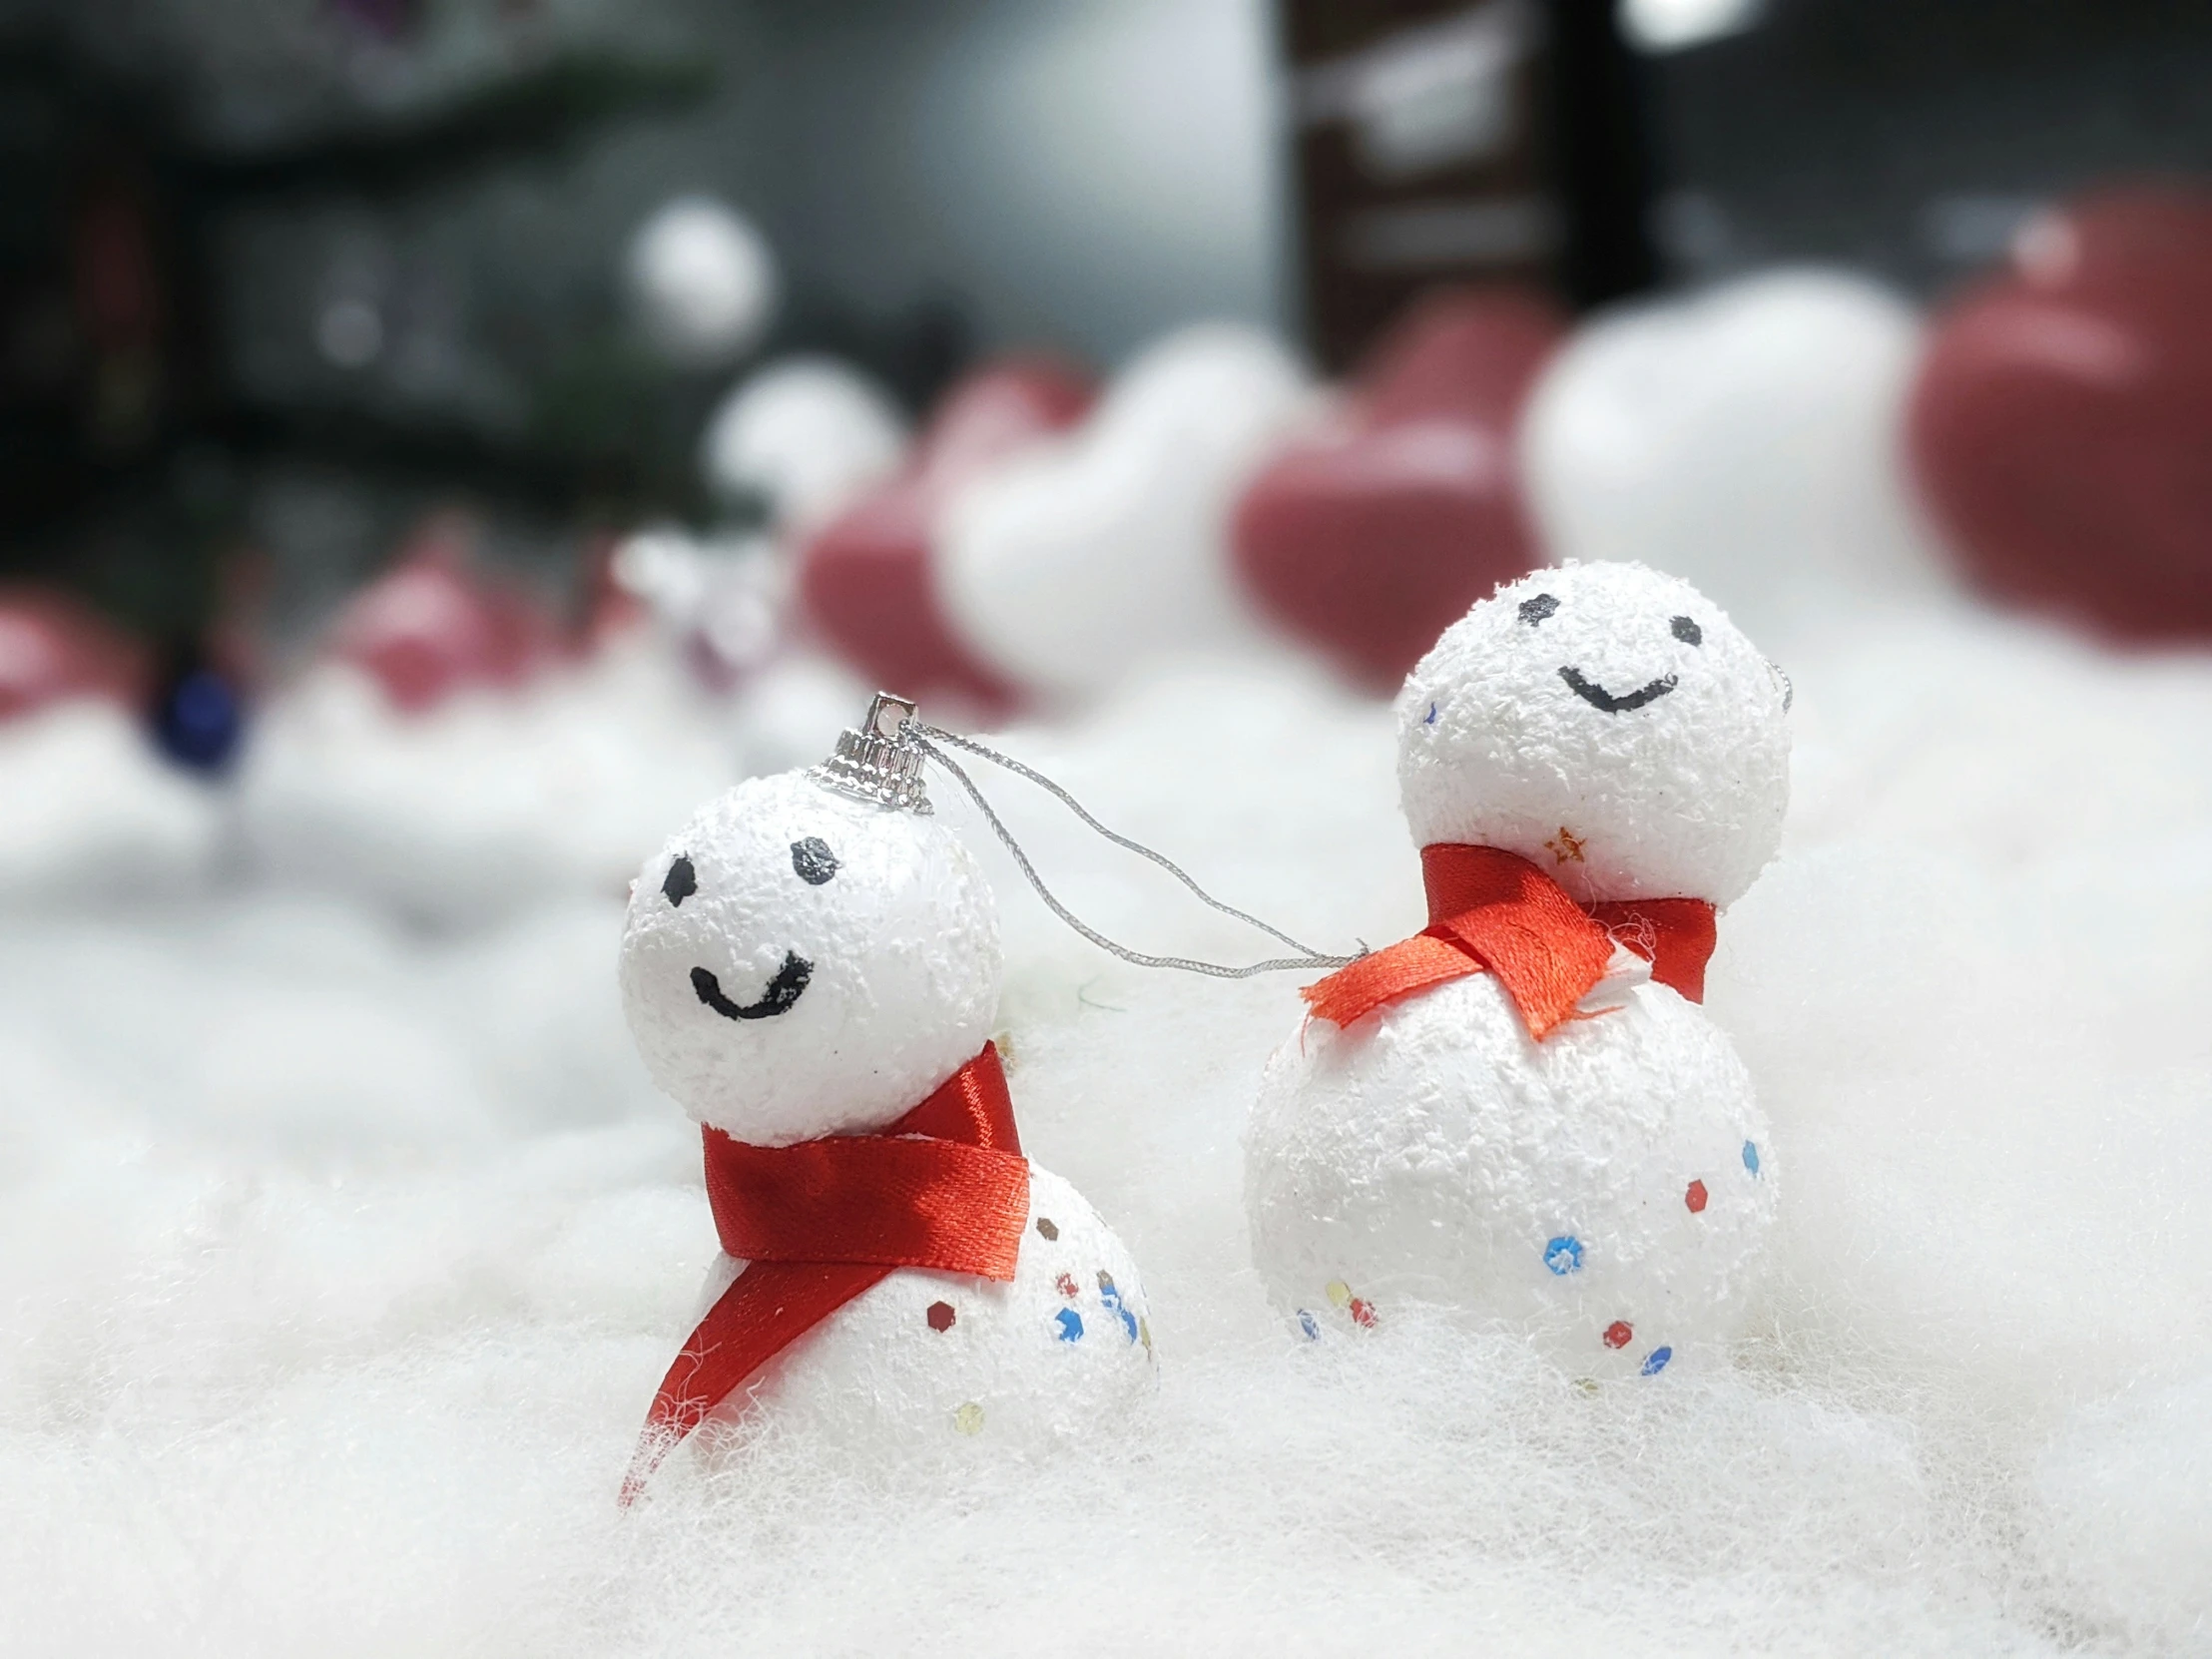 two snowman figures sitting in the snow